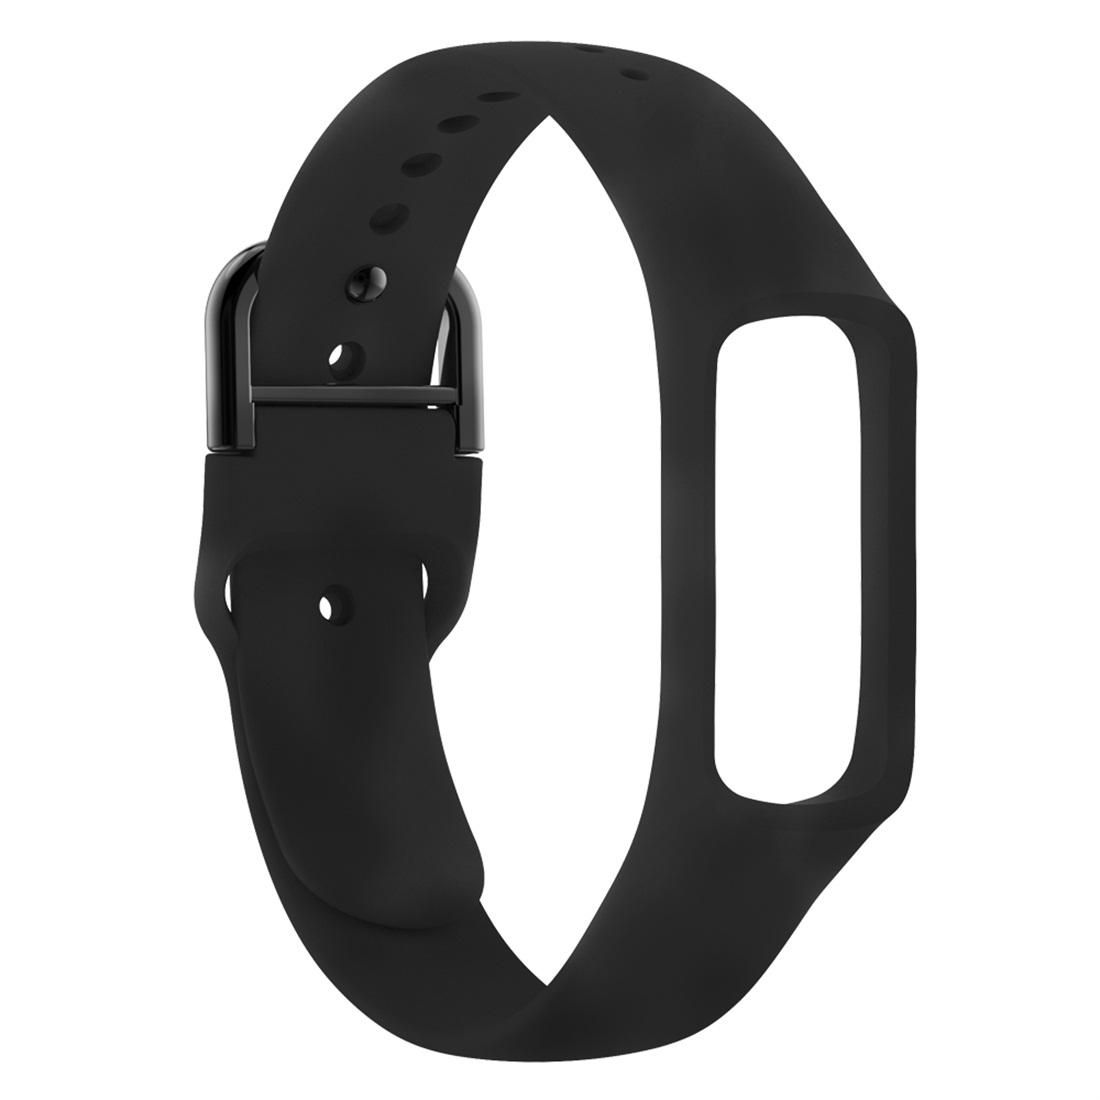 Smart Watch Pure Color Silicone Wrist Strap Watchband for Galaxy Fit-e (Grey)